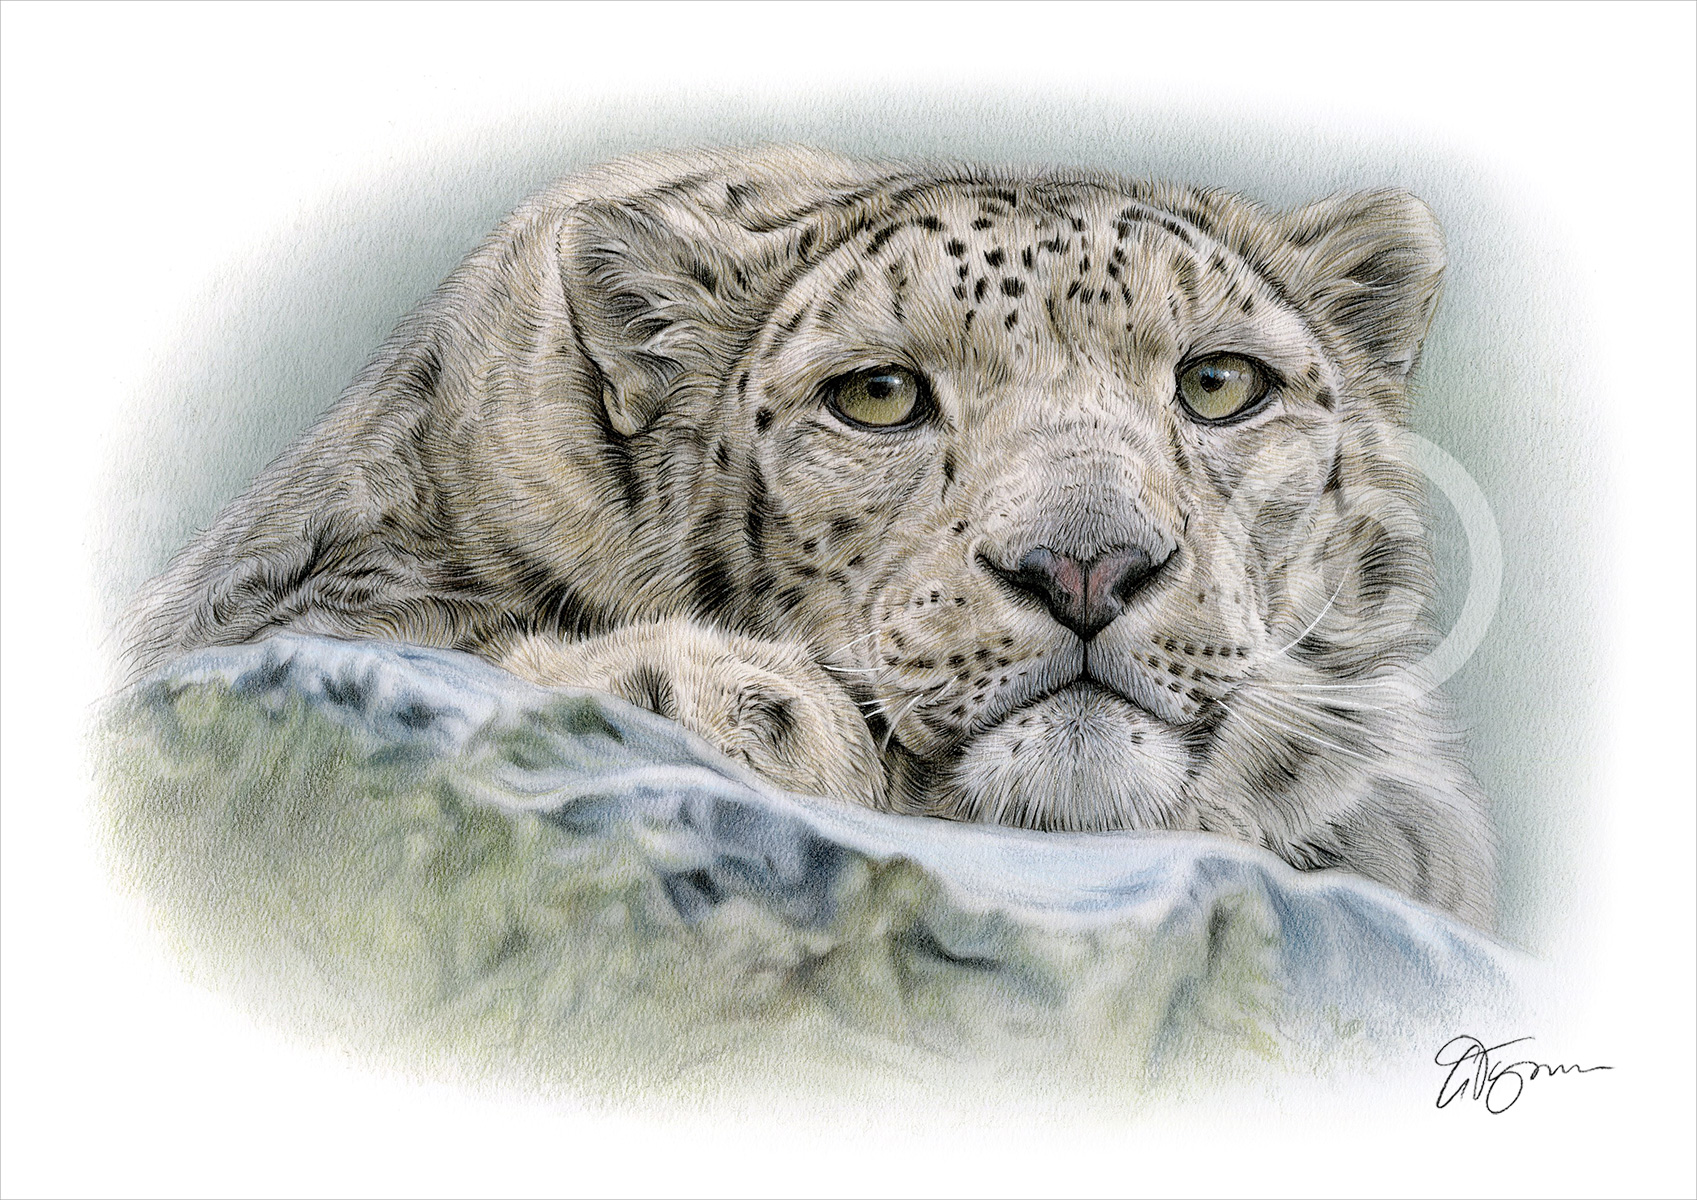 Colour pencil drawing of a Snow Leopard resting on a rock by artist Gary Tymon